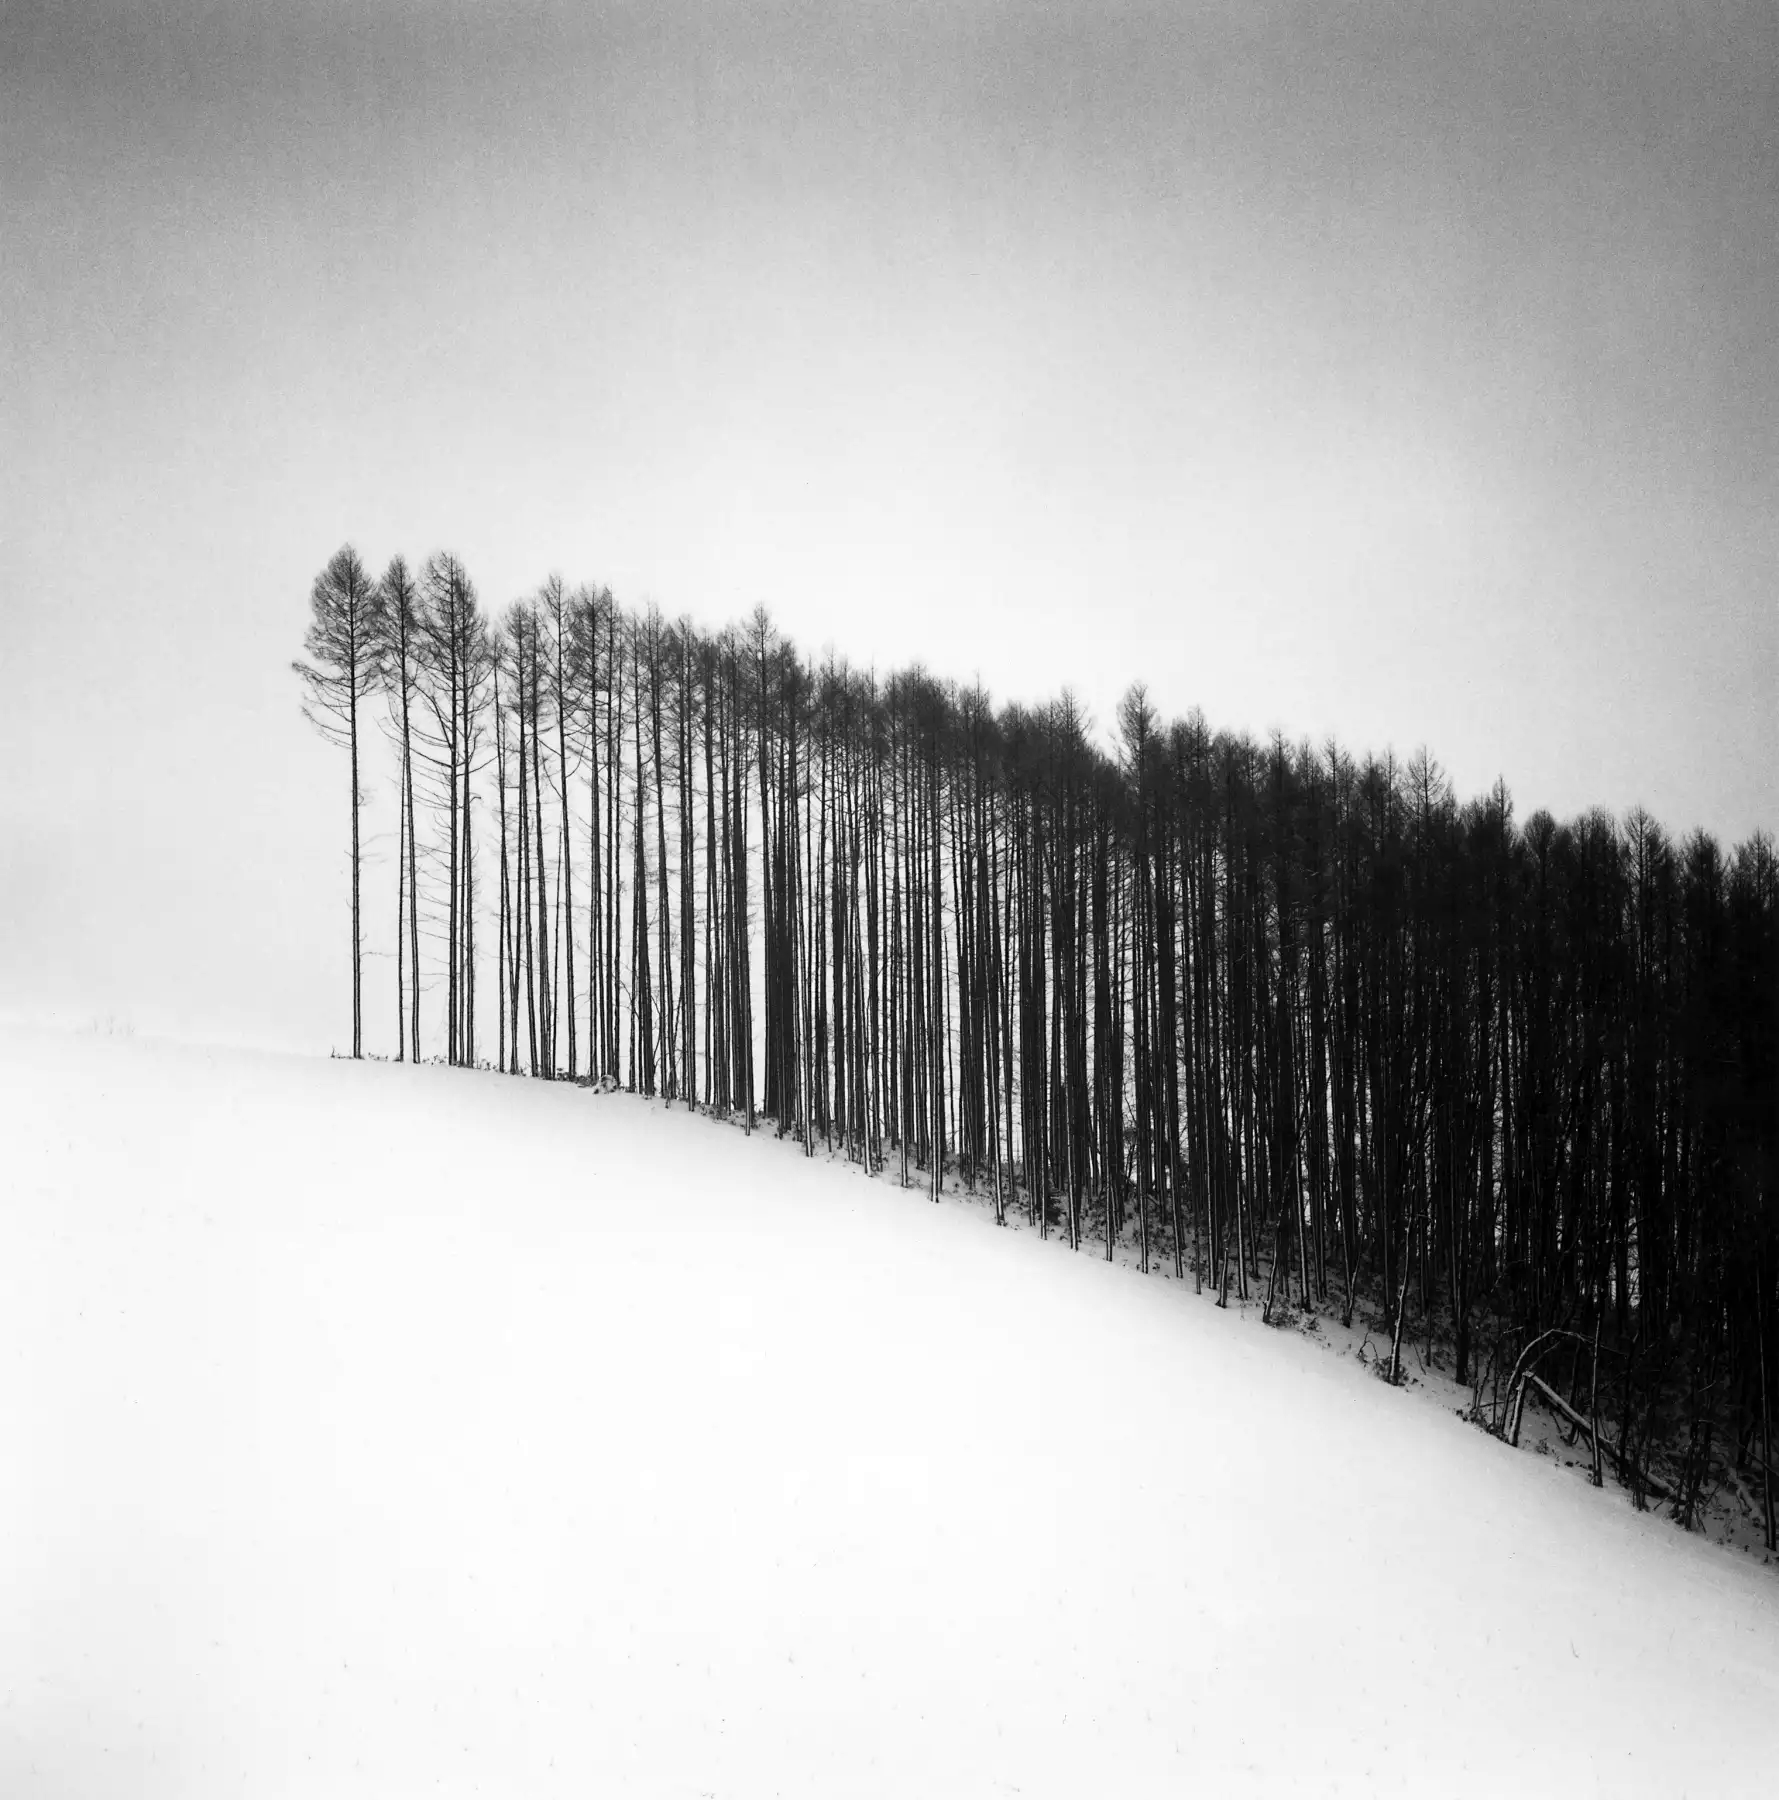 Michael Kenna — Images of the Seventh Day